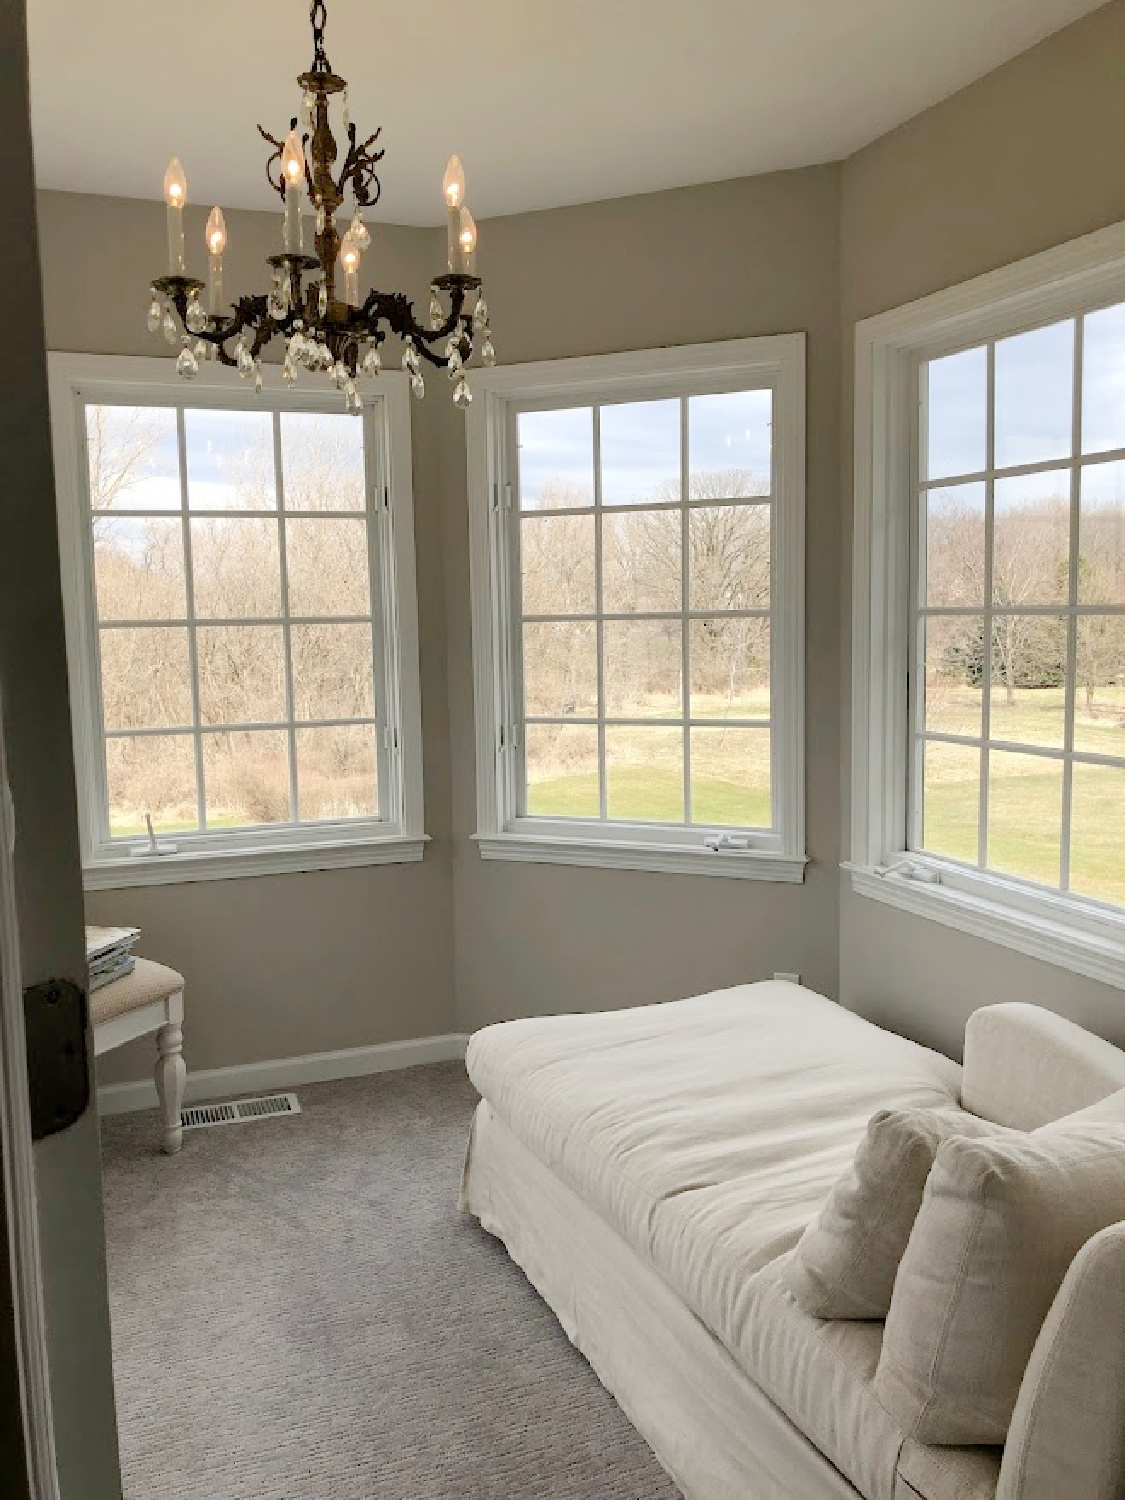 Belgian linen chaise in turret designed sitting room in coastal bedroom remodel (SW Agreeable Gray on walls) at the Georgian - Hello Lovely Studio. #agreeablegray #swagreeablegray